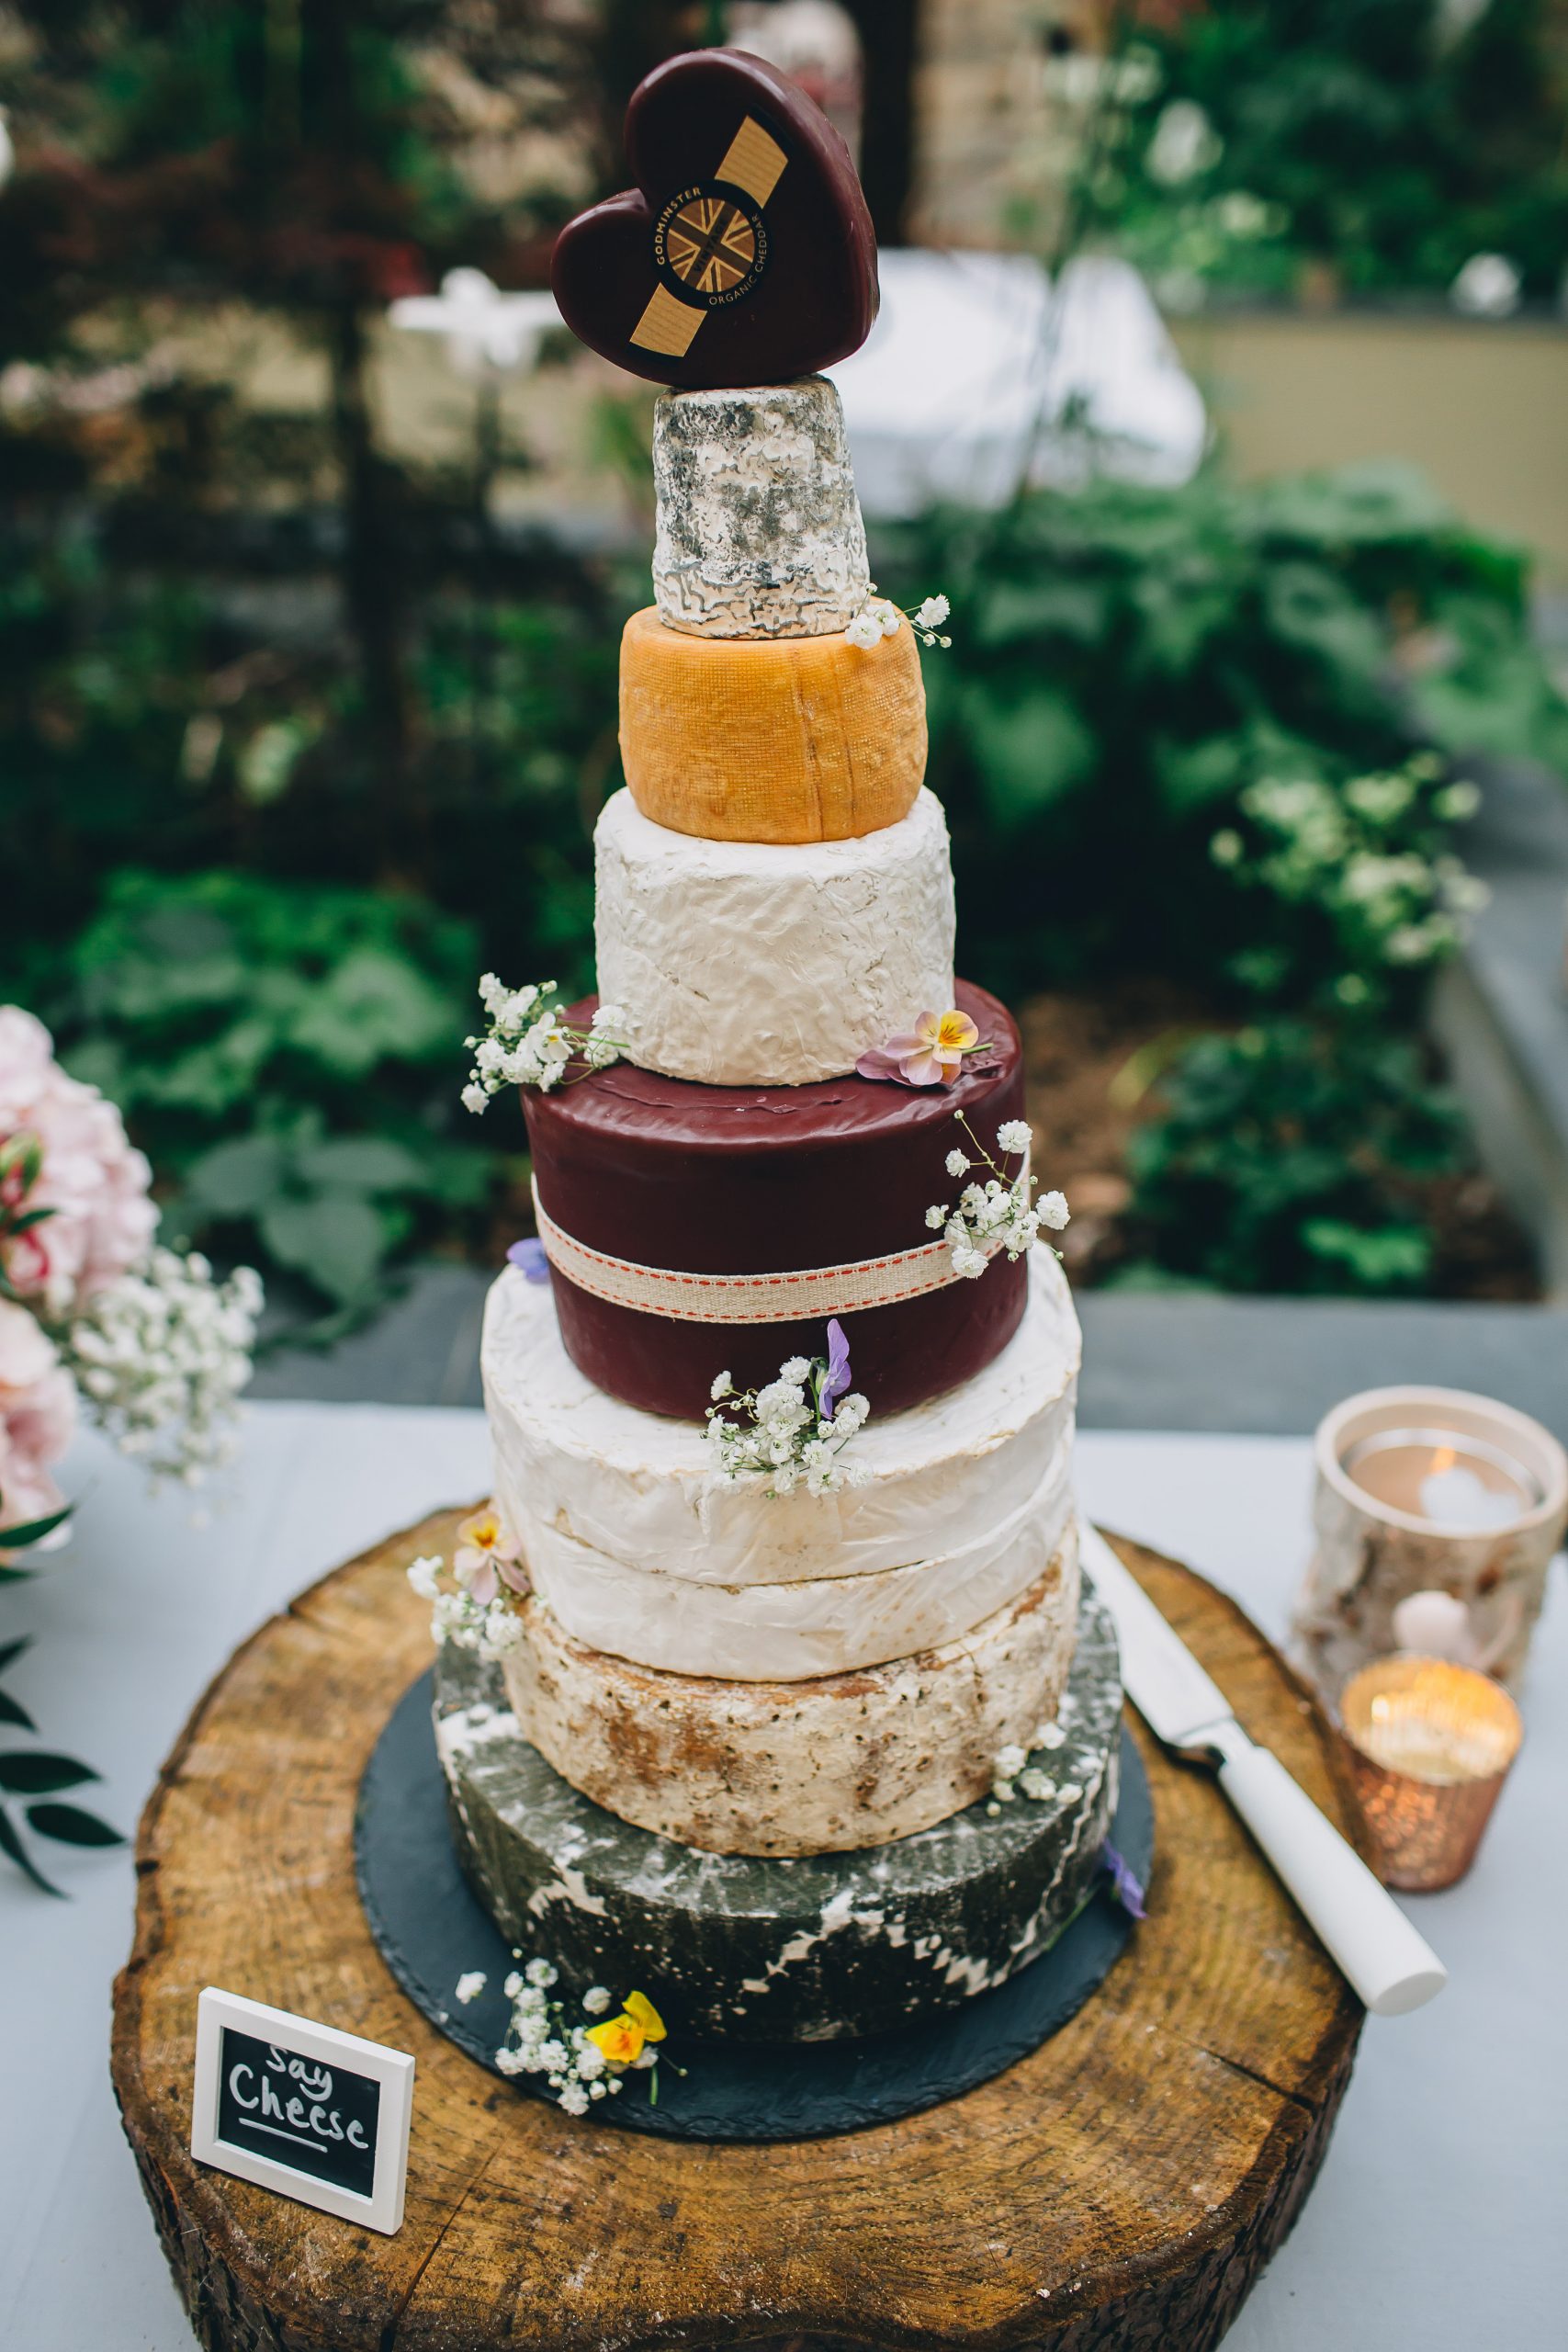 cheese, wheel, stinky, wedding, tower, cake, heart, ever after, cheese gromit, flower, fruit, leaves, ribbon, wax, colours, crackers